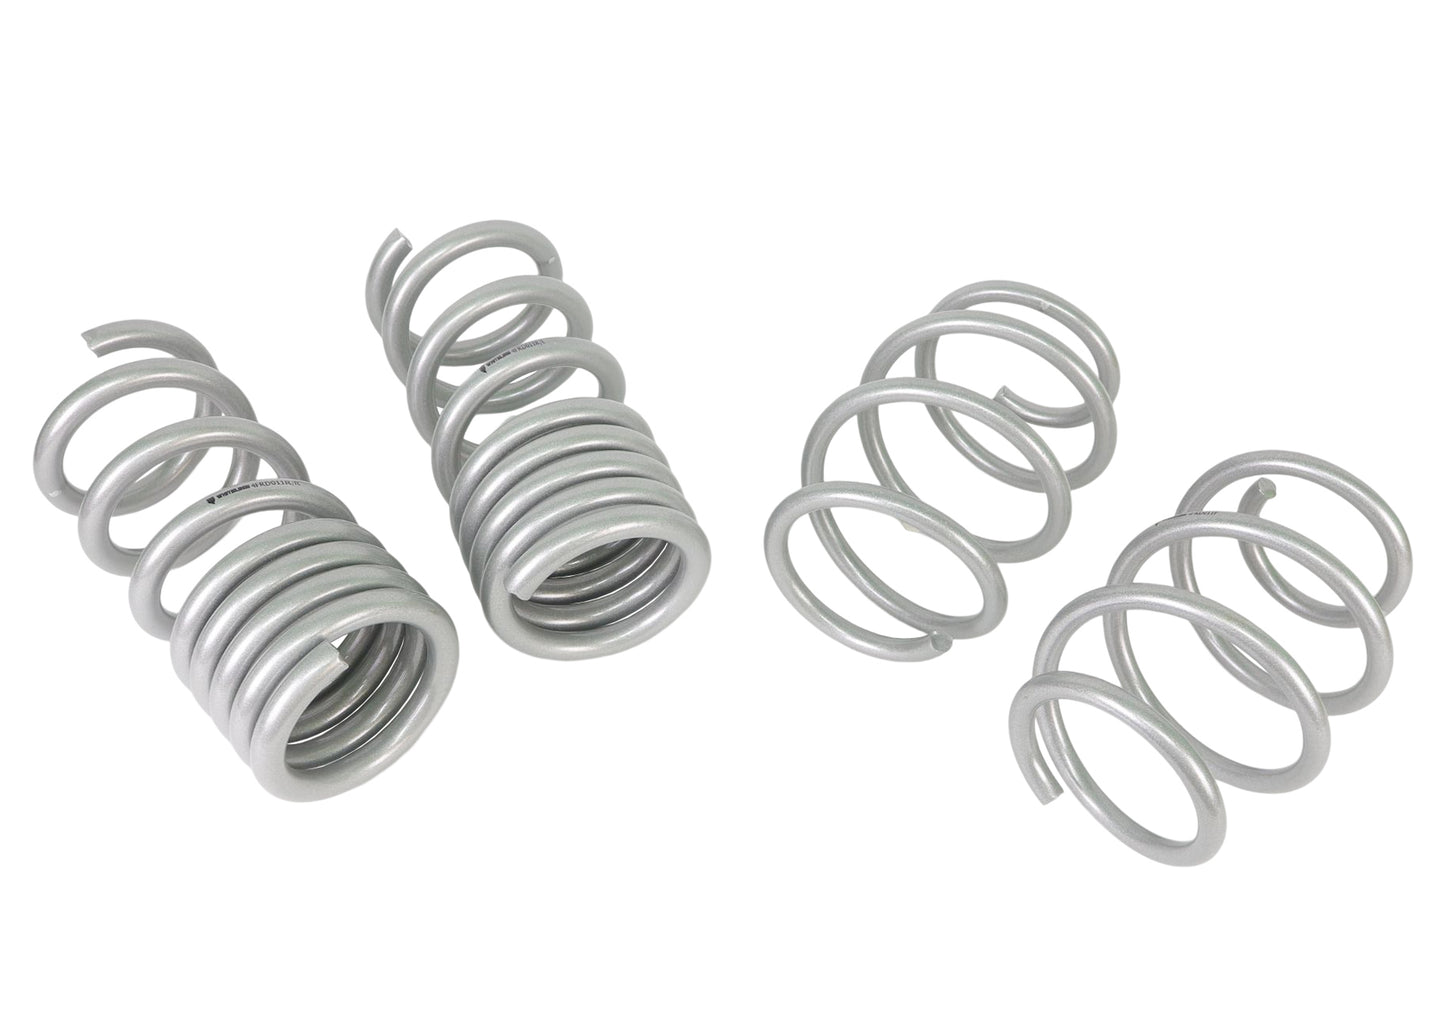 Performance Lowering Spring Kit Ford Mustang S550/S650 GT 2018-On with MagneRide